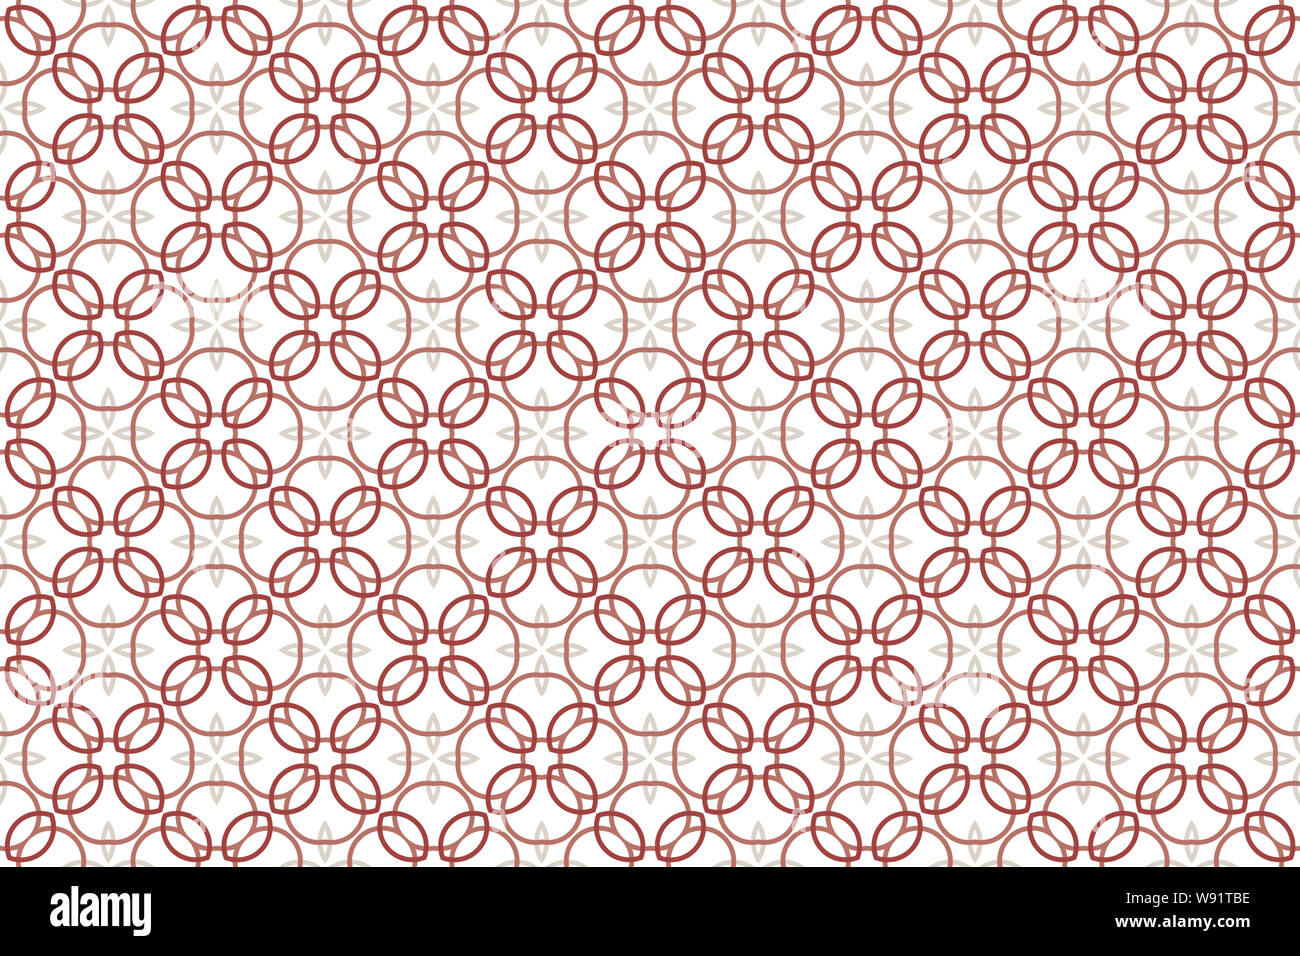 Seamless pattern. White background and intertwined lines, circles, rounded diamonds and four pointed stars in light and dark red and light brown, crea Stock Photo